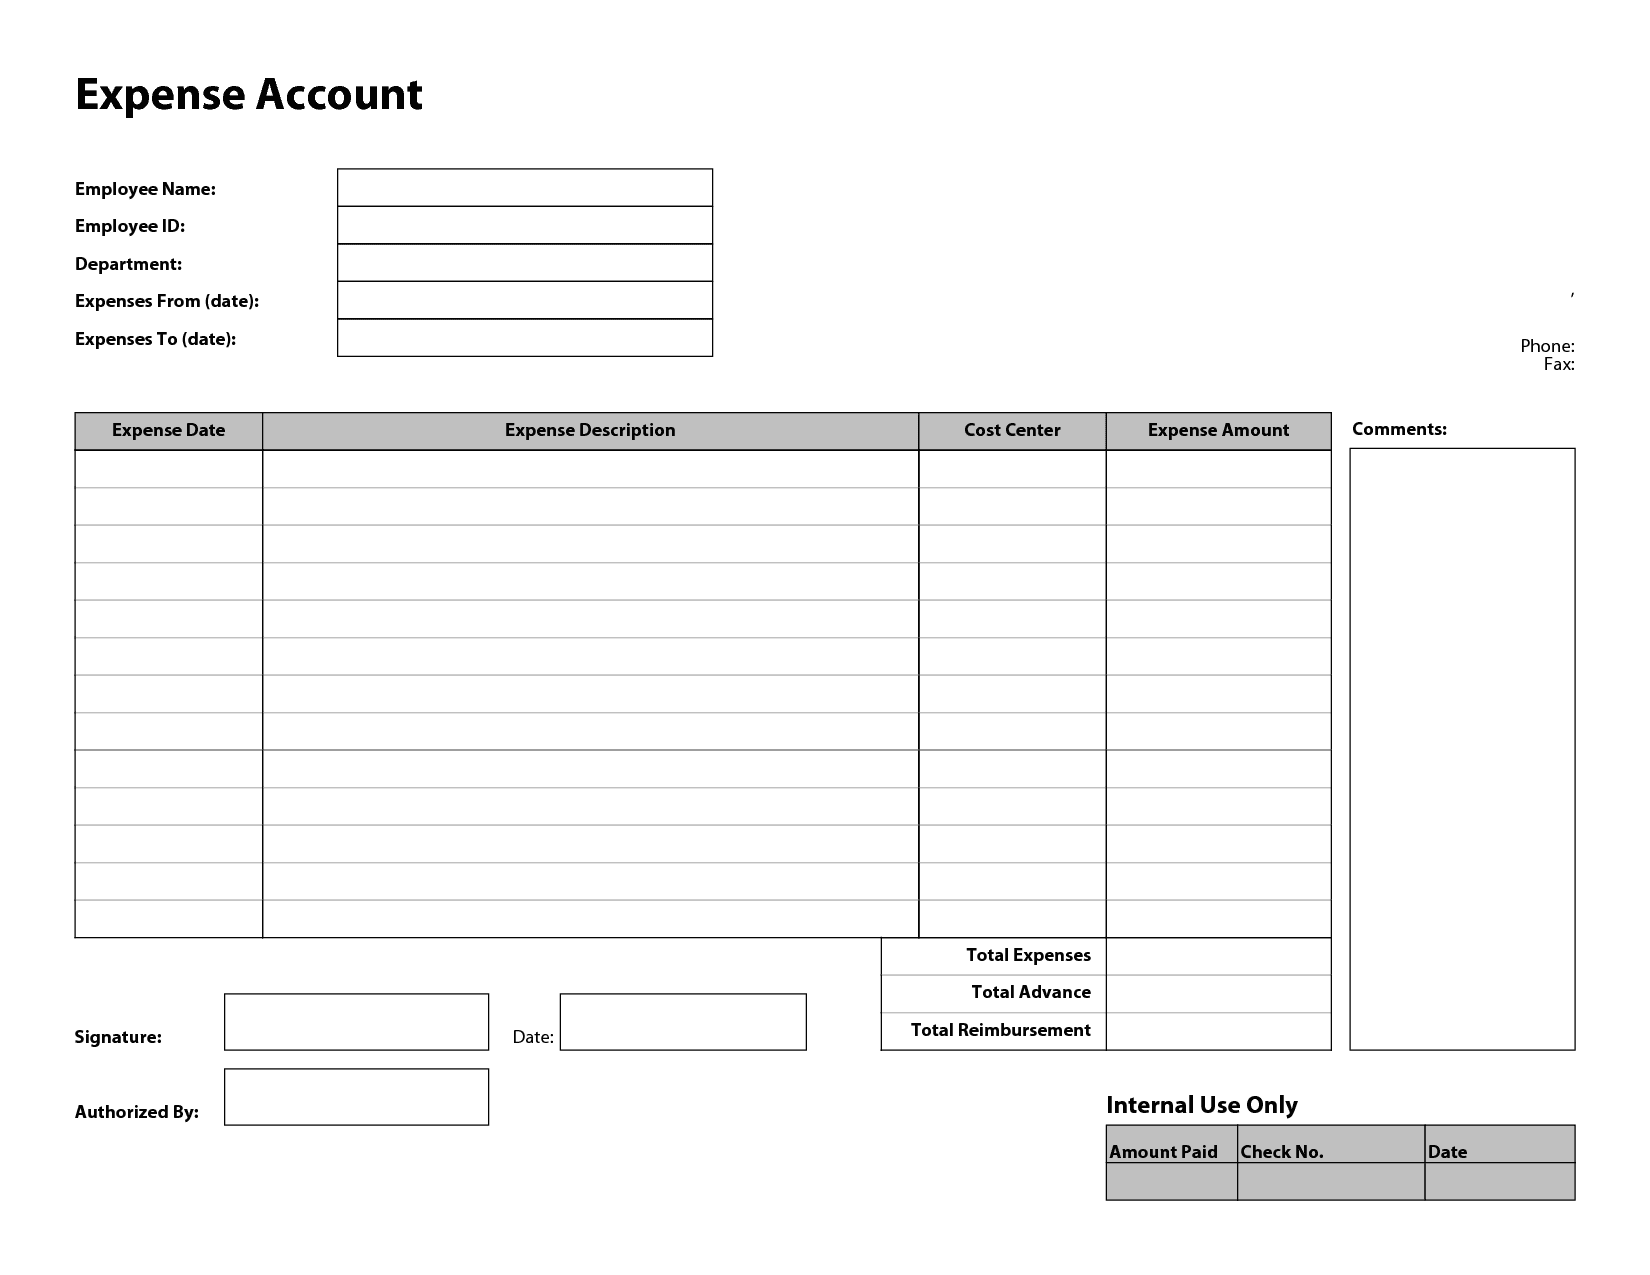 expense-report-template-word-2-excelxo